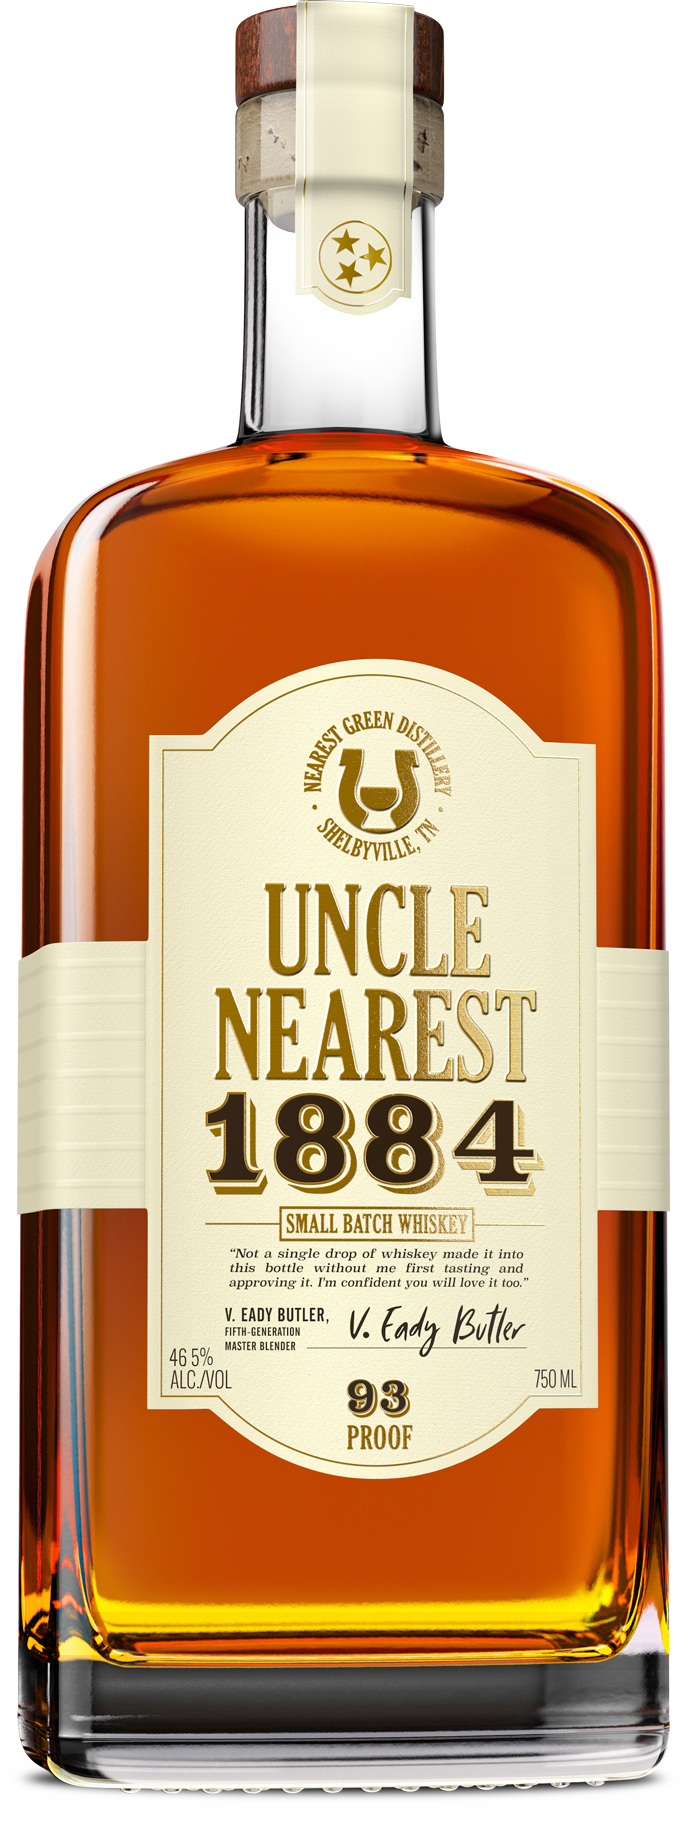 Uncle Nearest 1884 Small Batch Whiskey Tennessee